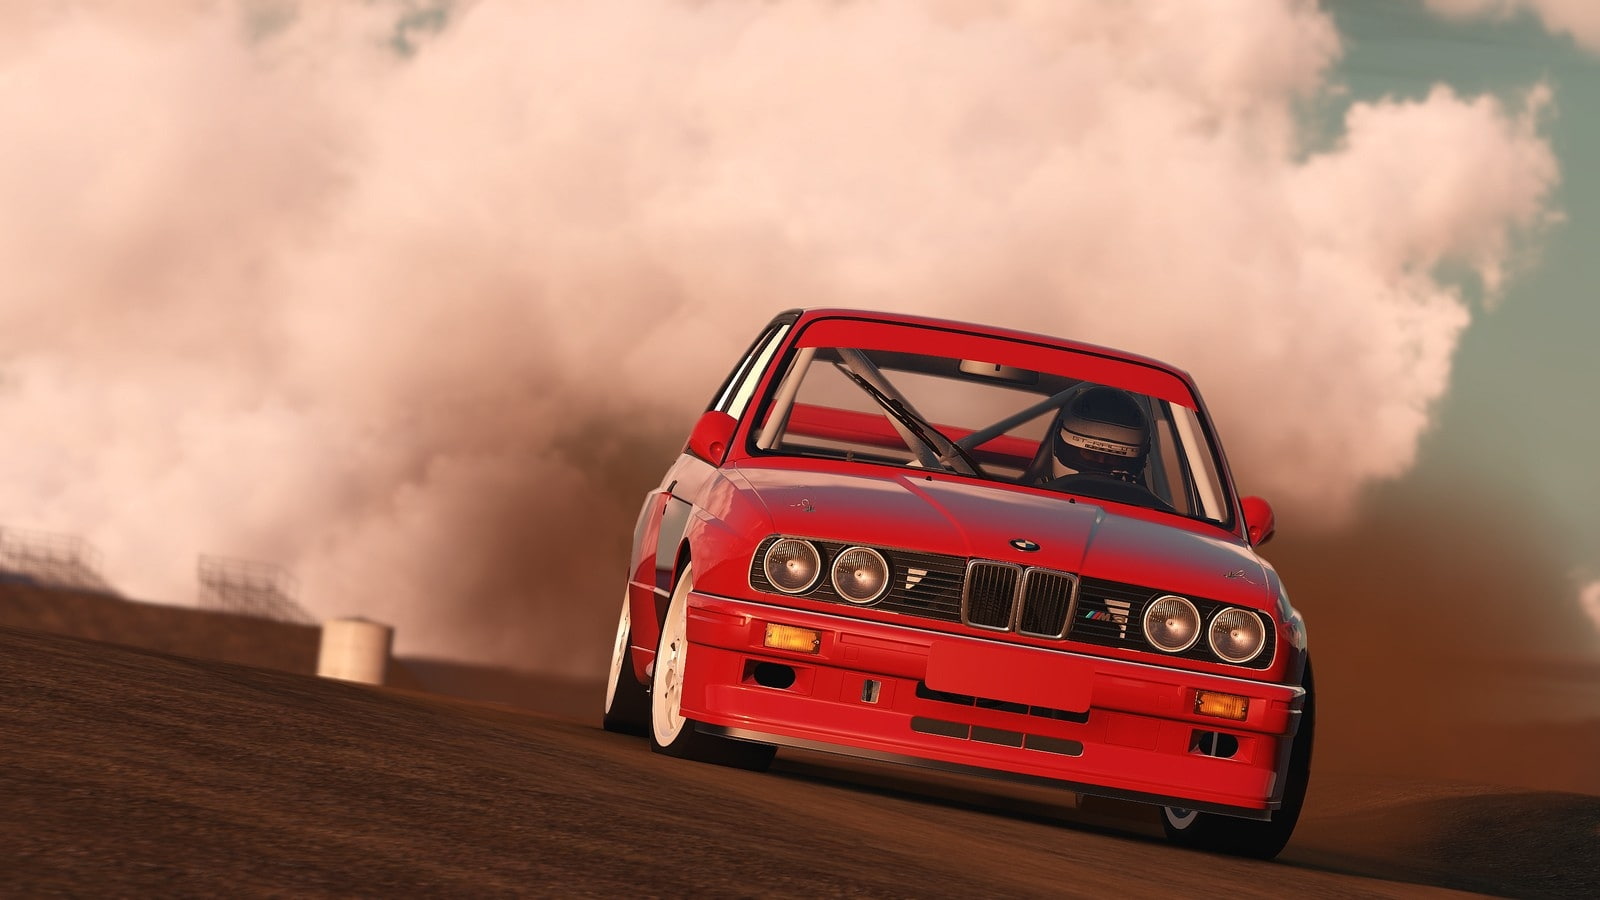 video games cars racing bmw m3 bmw e30 project cars auto image racing games 1600x900  Sports Auto Racing HD Art